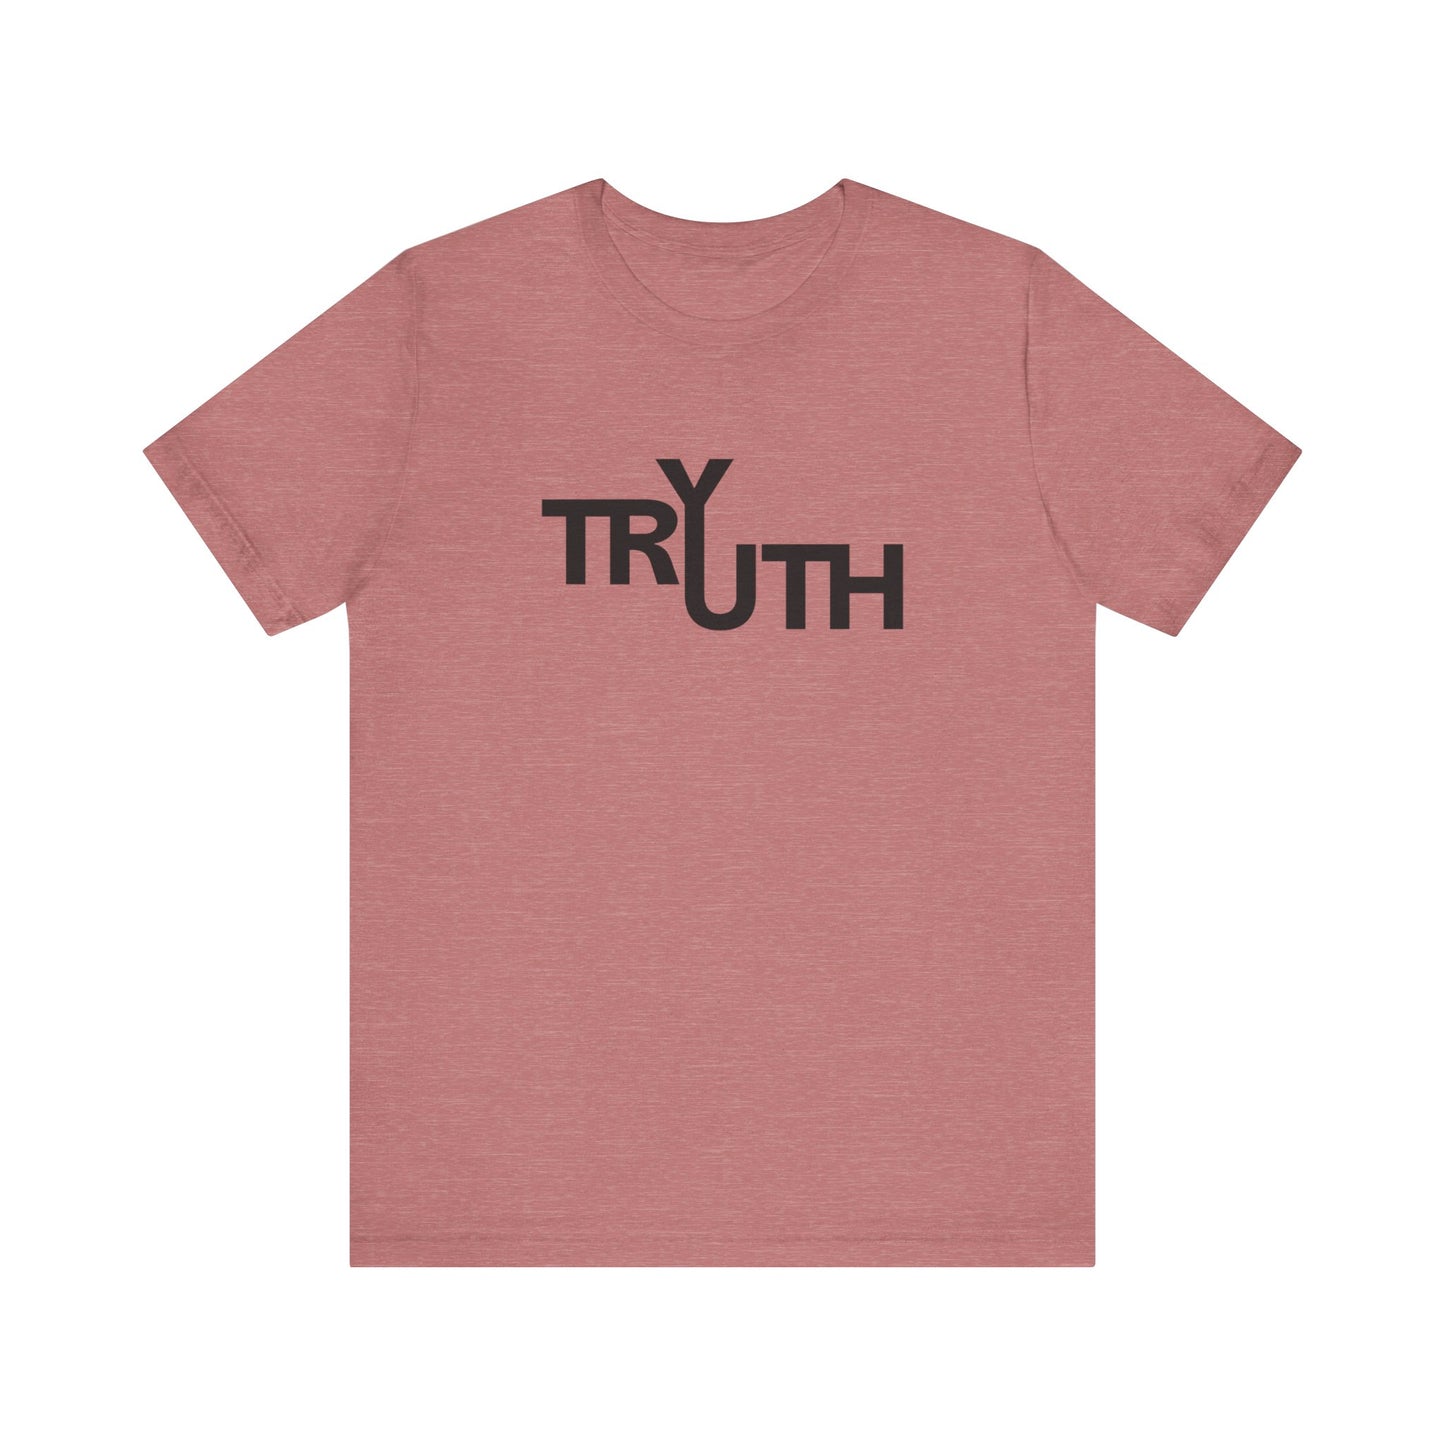 Try Truth - Unisex T-Shirt